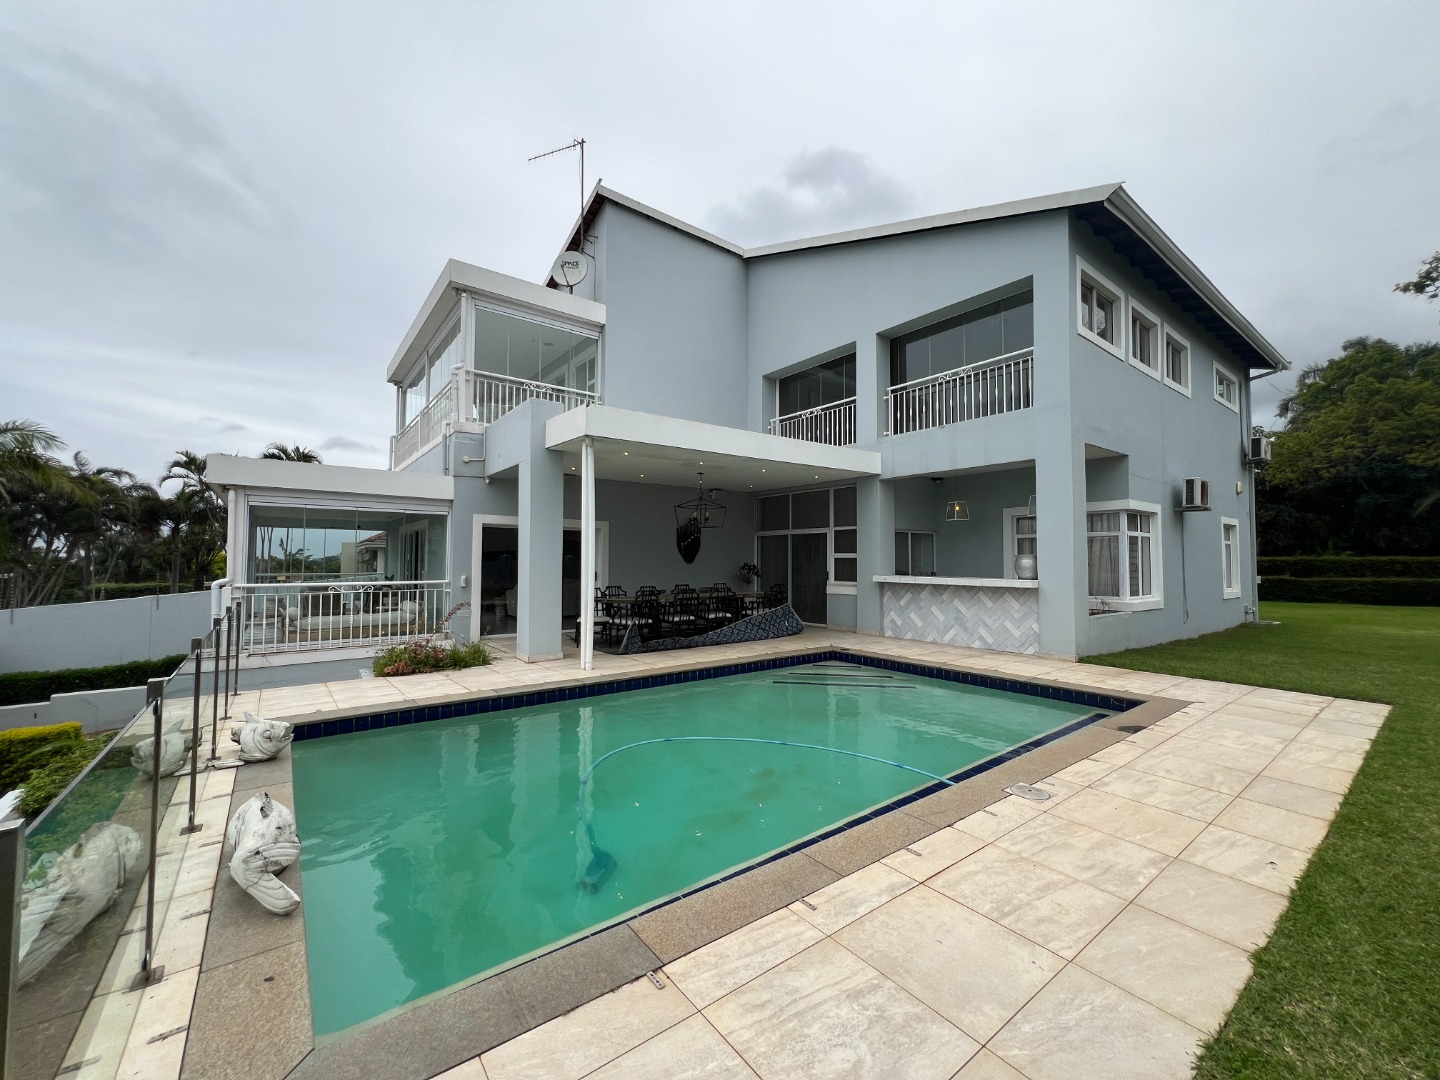 Exquisite 5 Bedroom Luxury House For Sale in Durban North